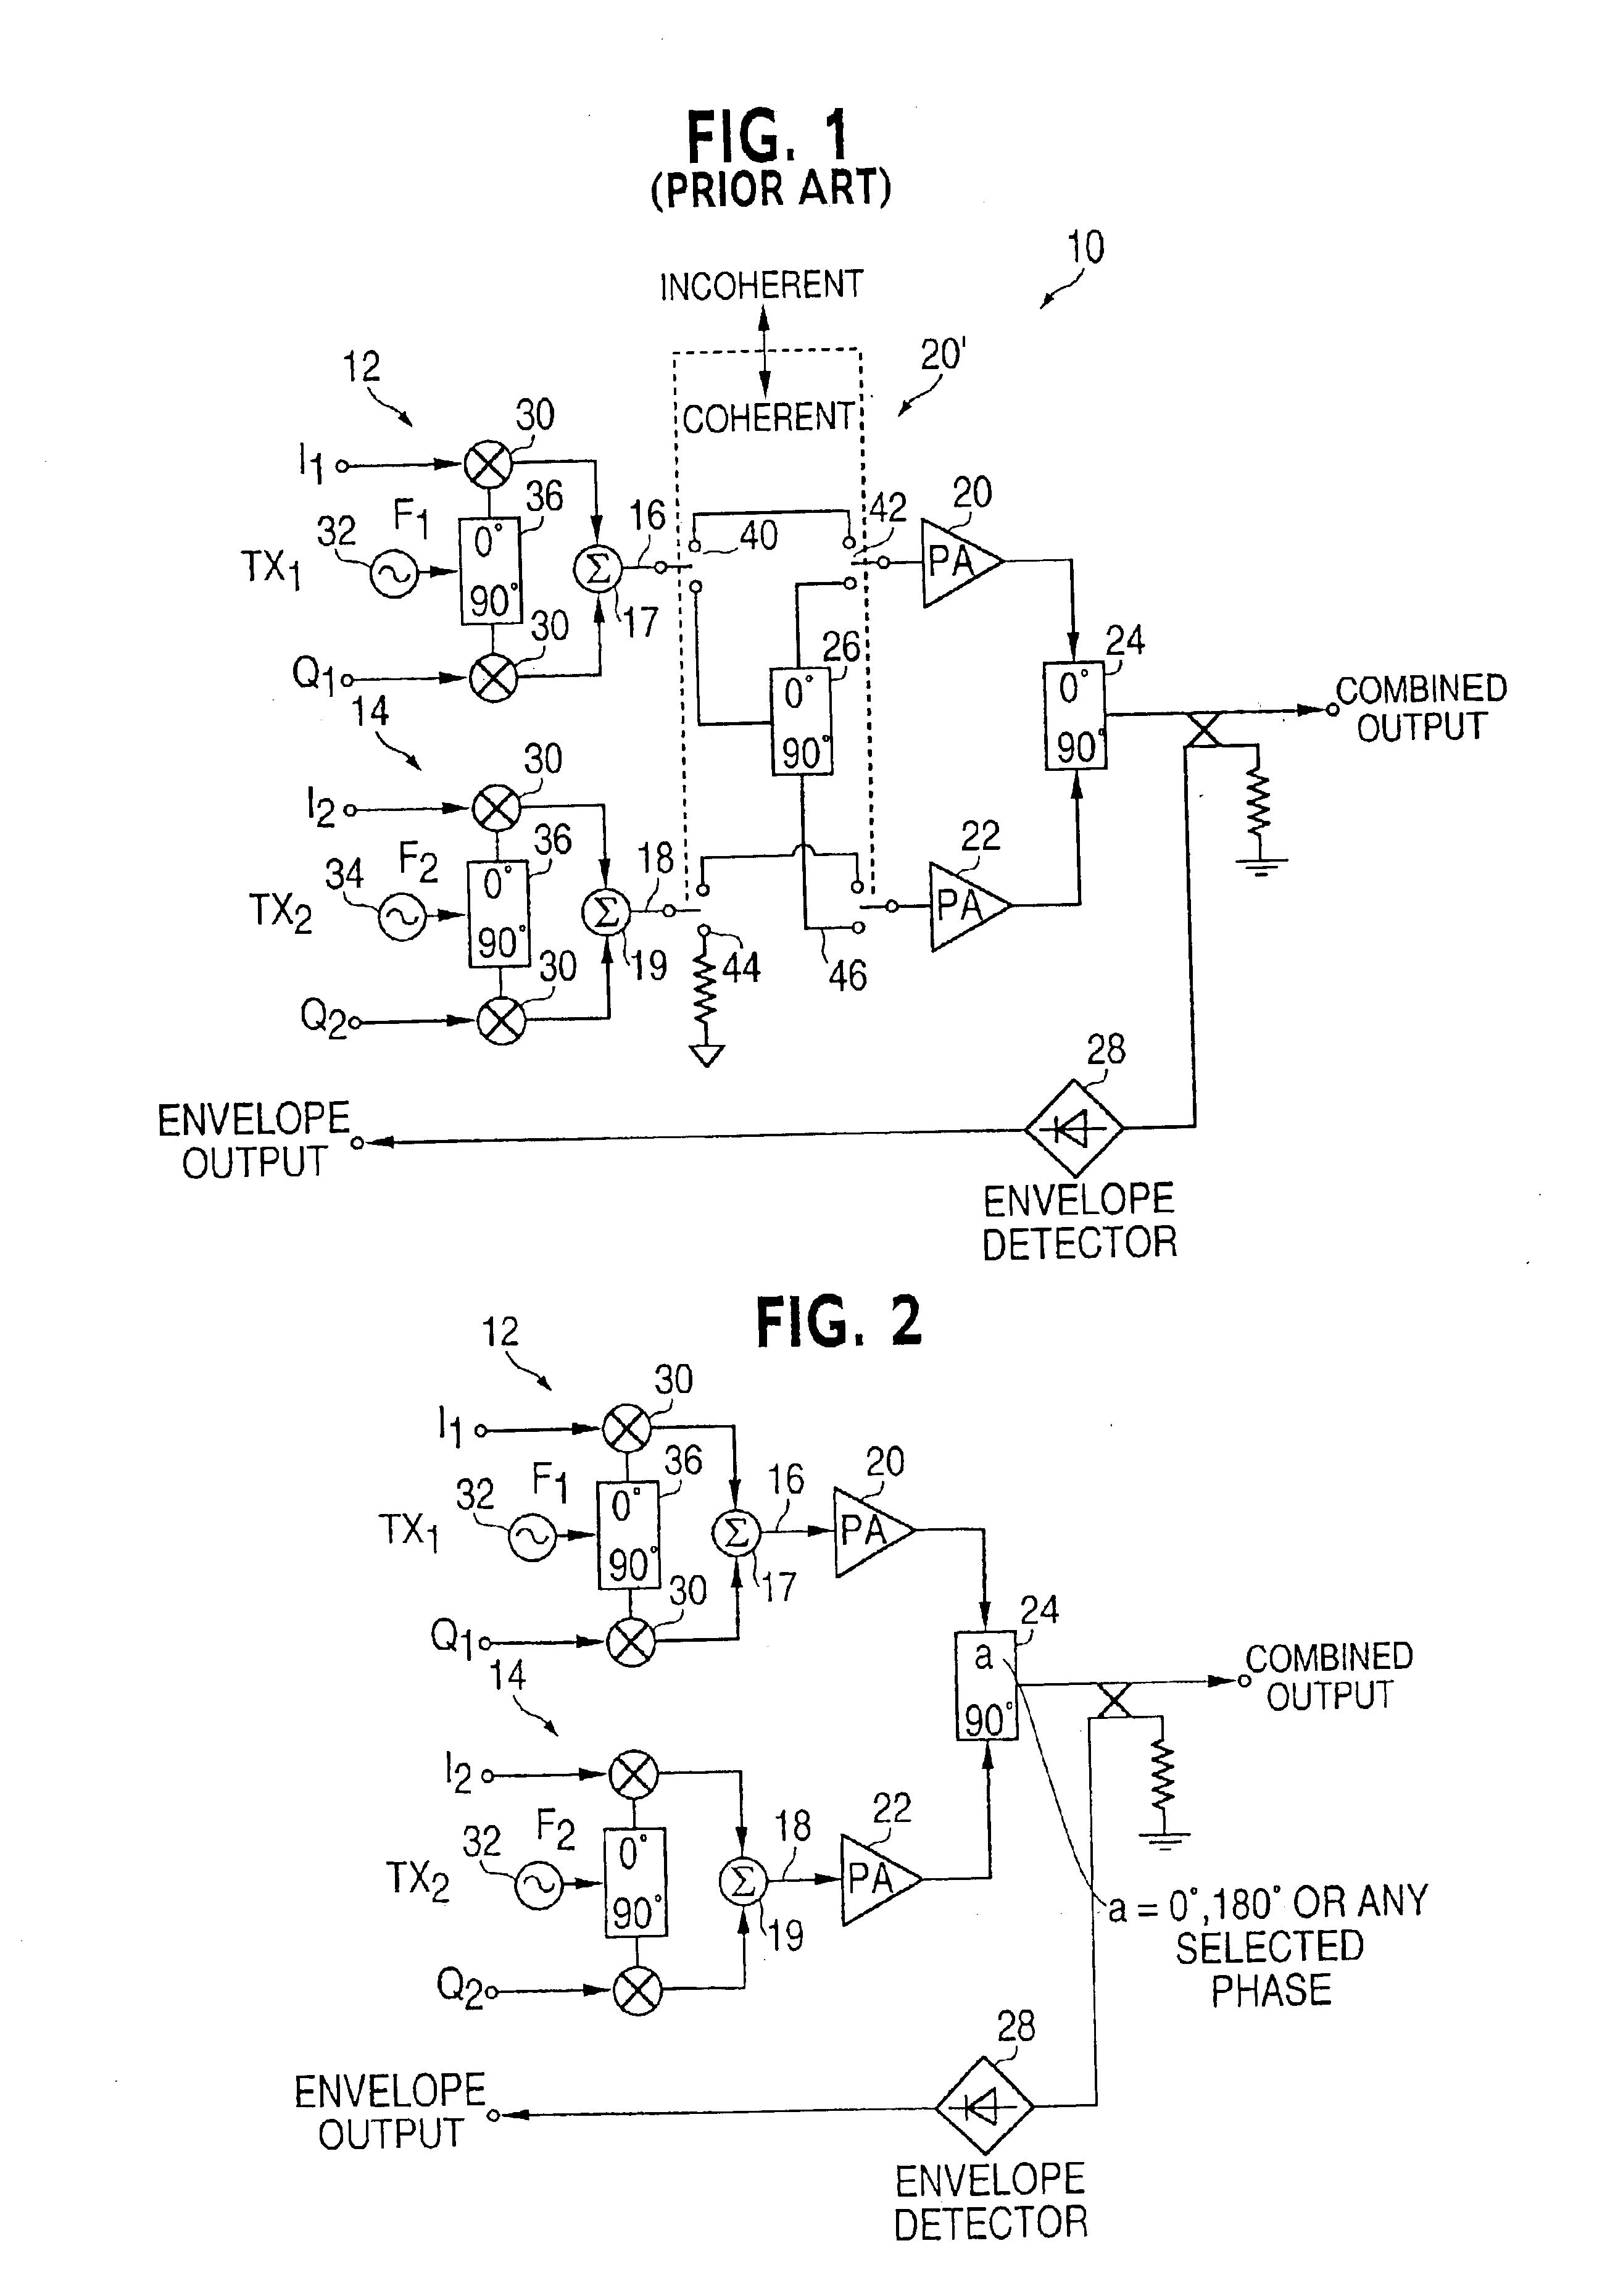 Switchless combining of multi-carrier coherent and incoherent carriers